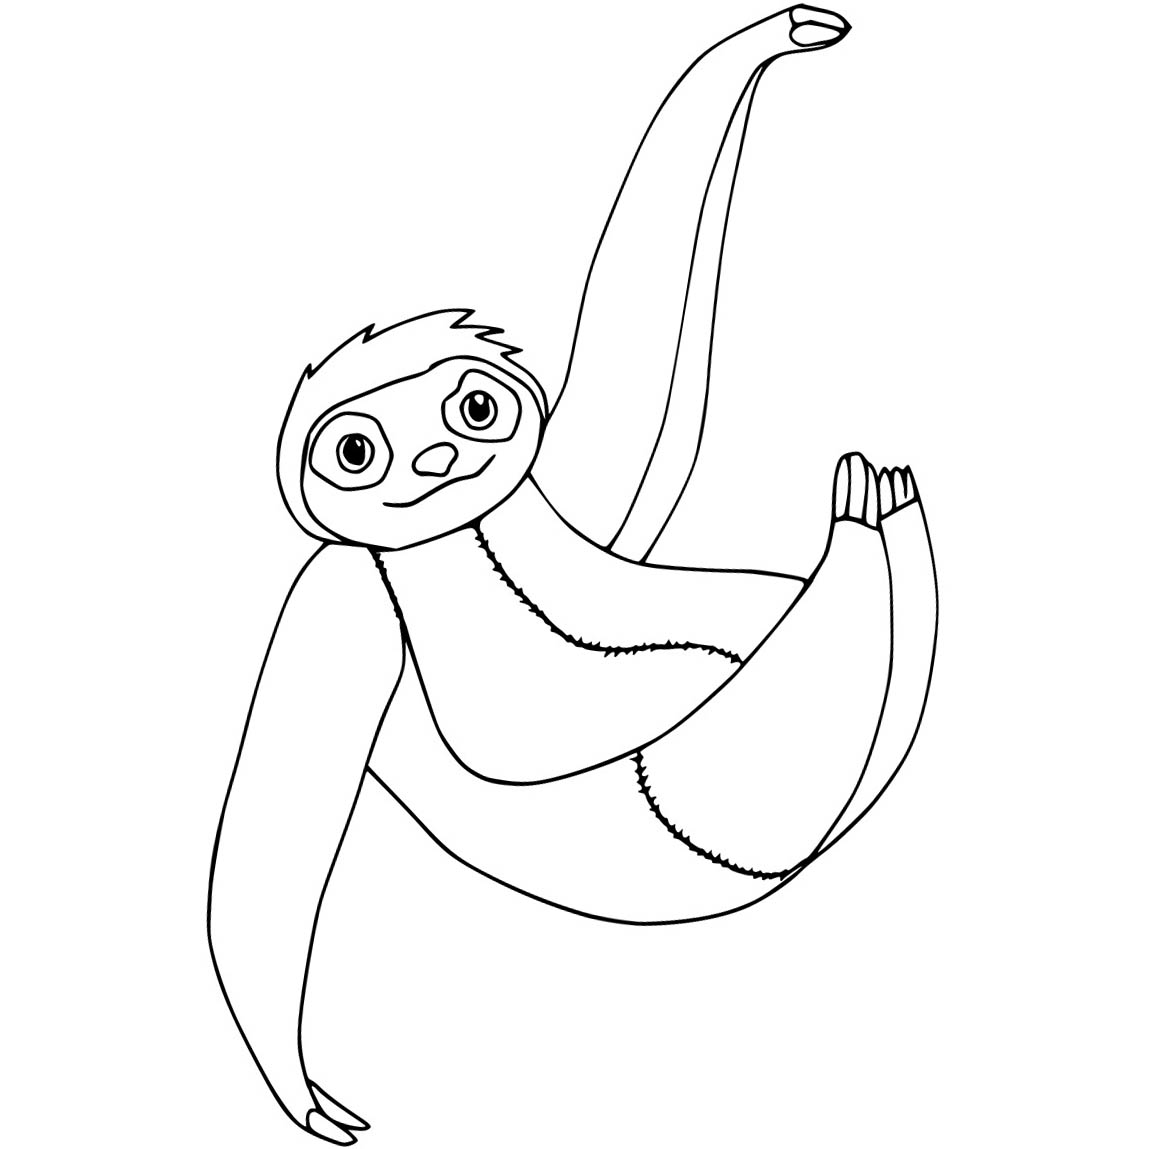 Free Sloth with Long Arms Coloring Pages printable